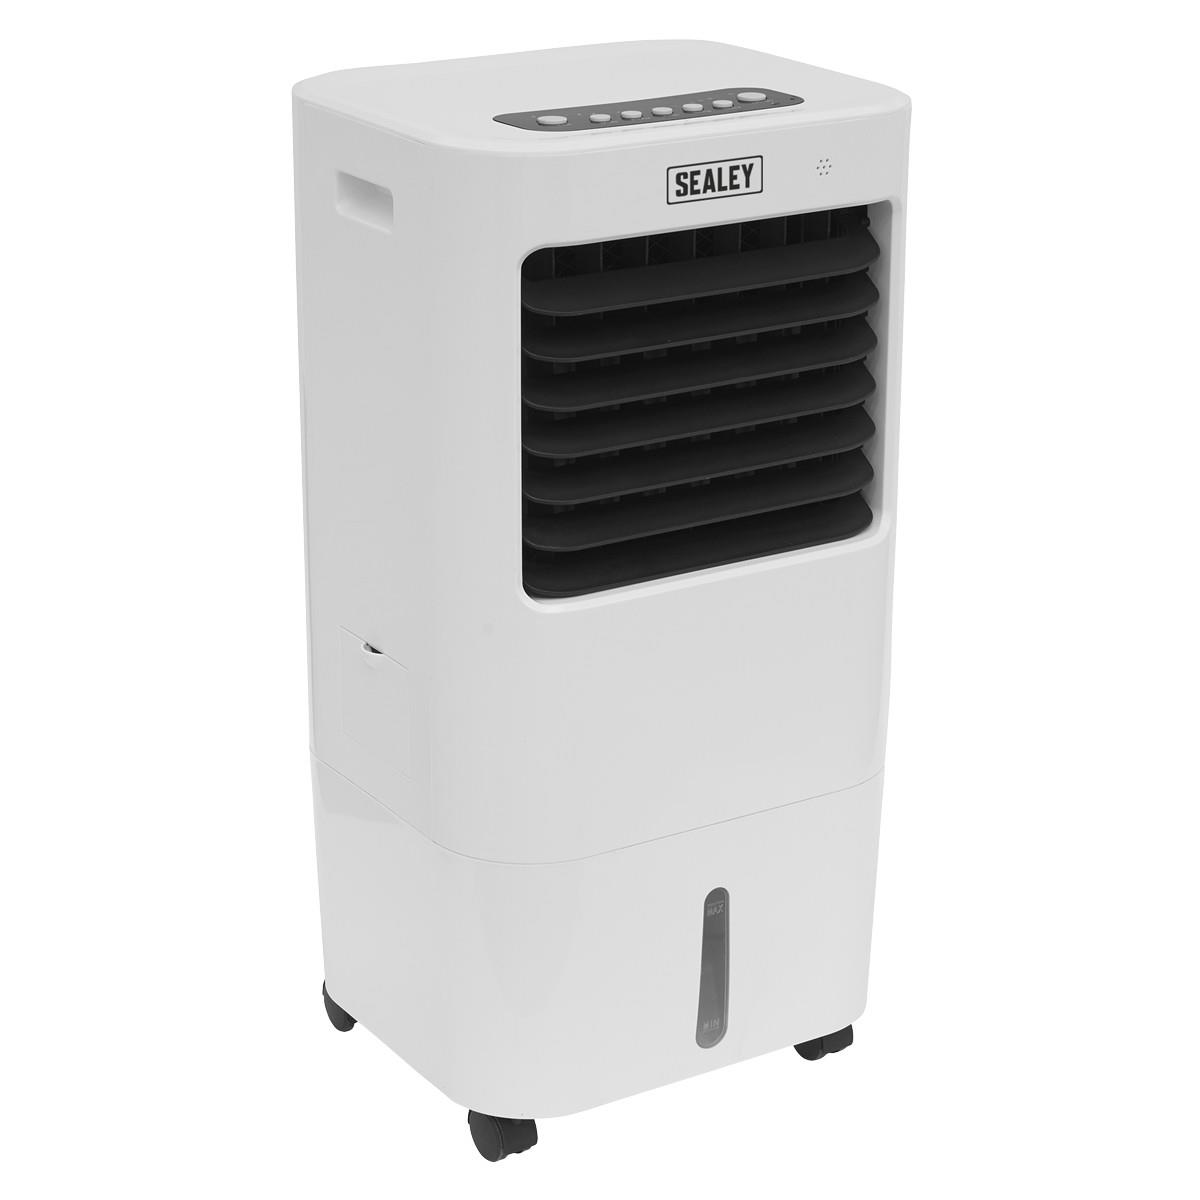 Sealey SAC13 Air Cooler/Purifier/ Humidifier With Remote Control; 13L Water Tank; 230 Volt